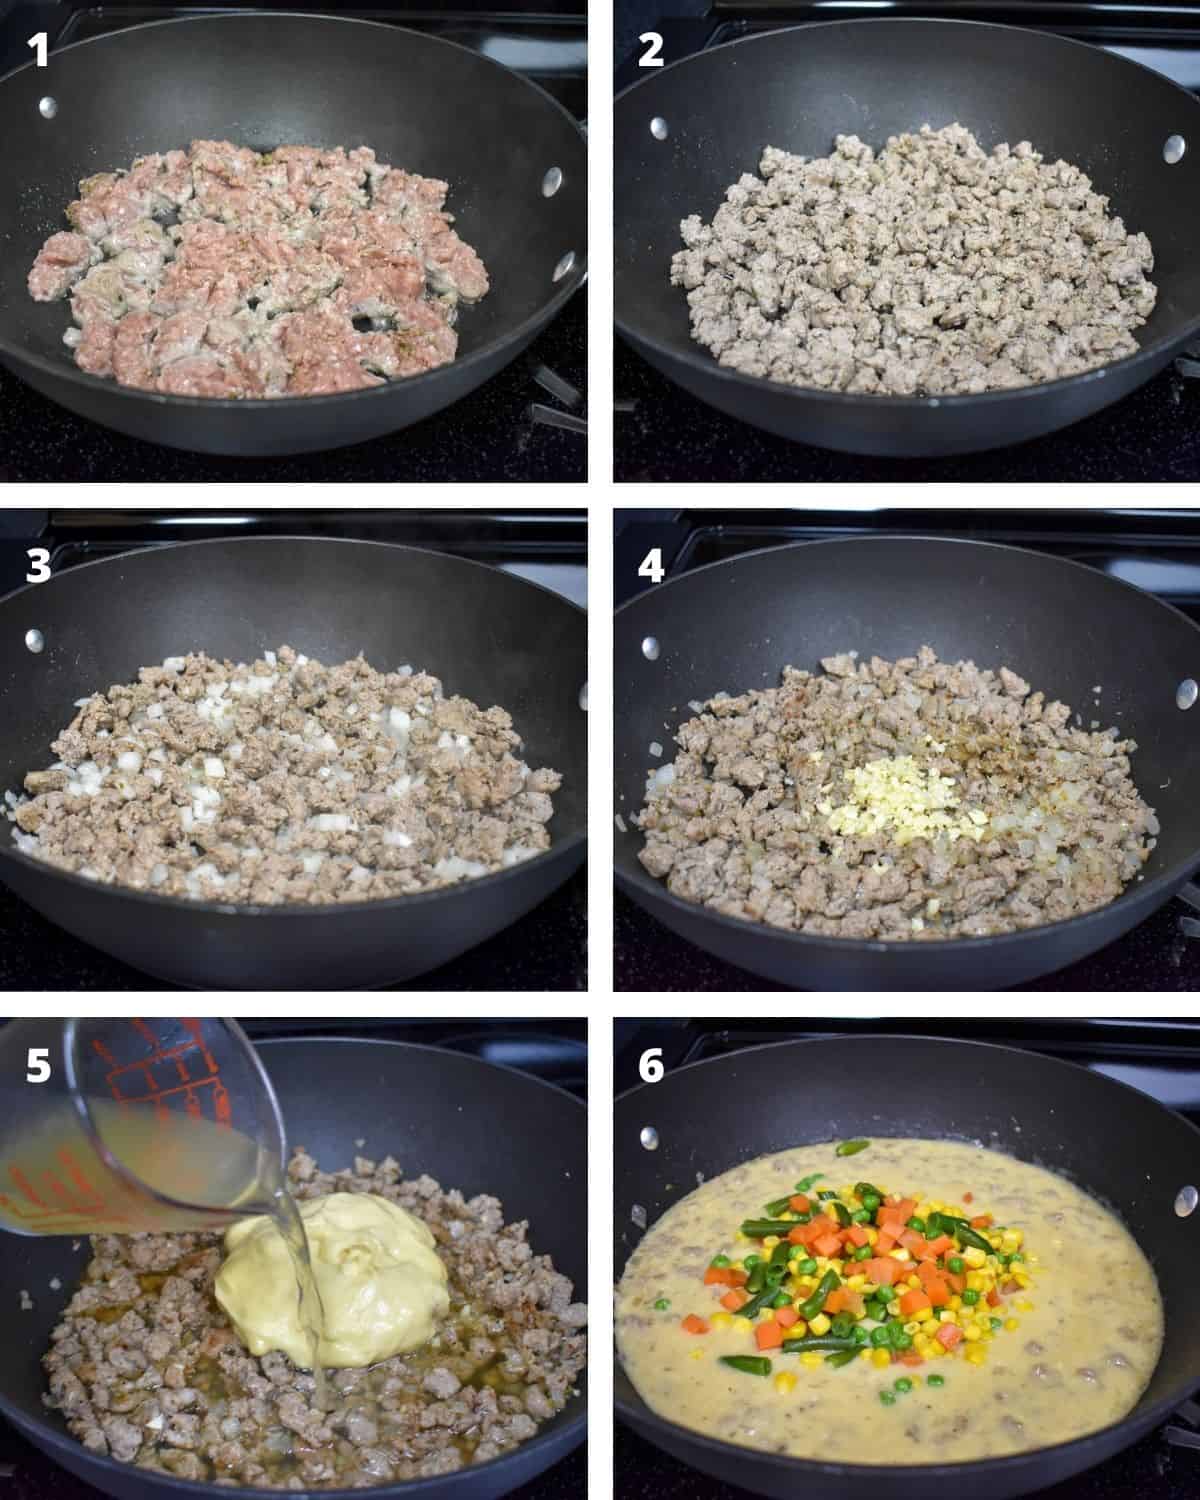 A collage of six images showing the steps of making the ground turkey filling for the casserole.